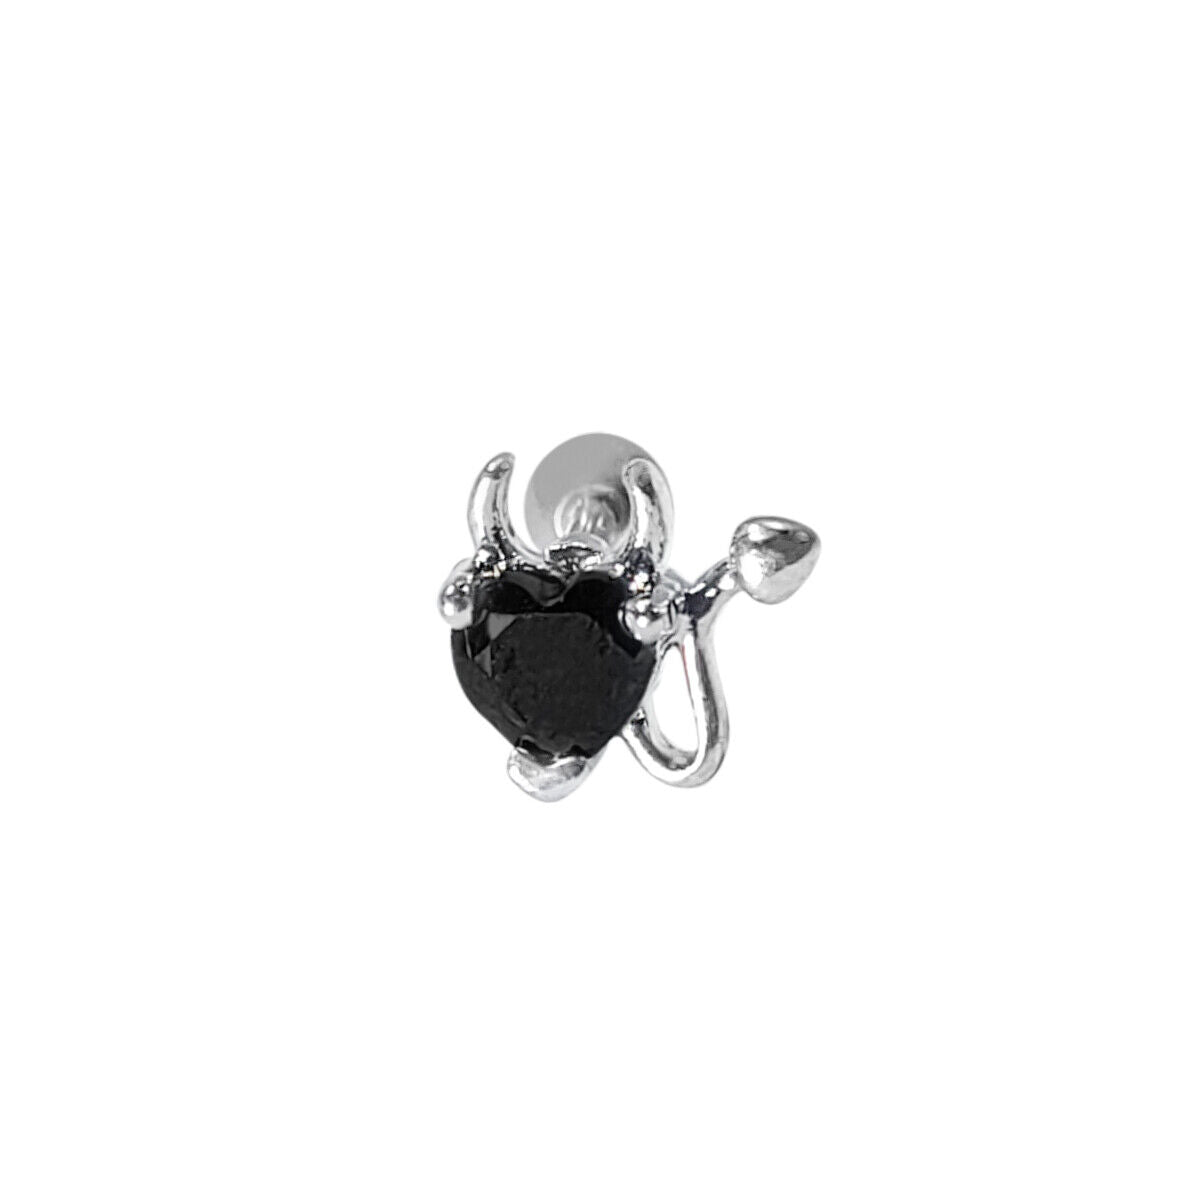 Ear Cartilage Heart CZ with Devil Horns Surgical Steel Earring 16g